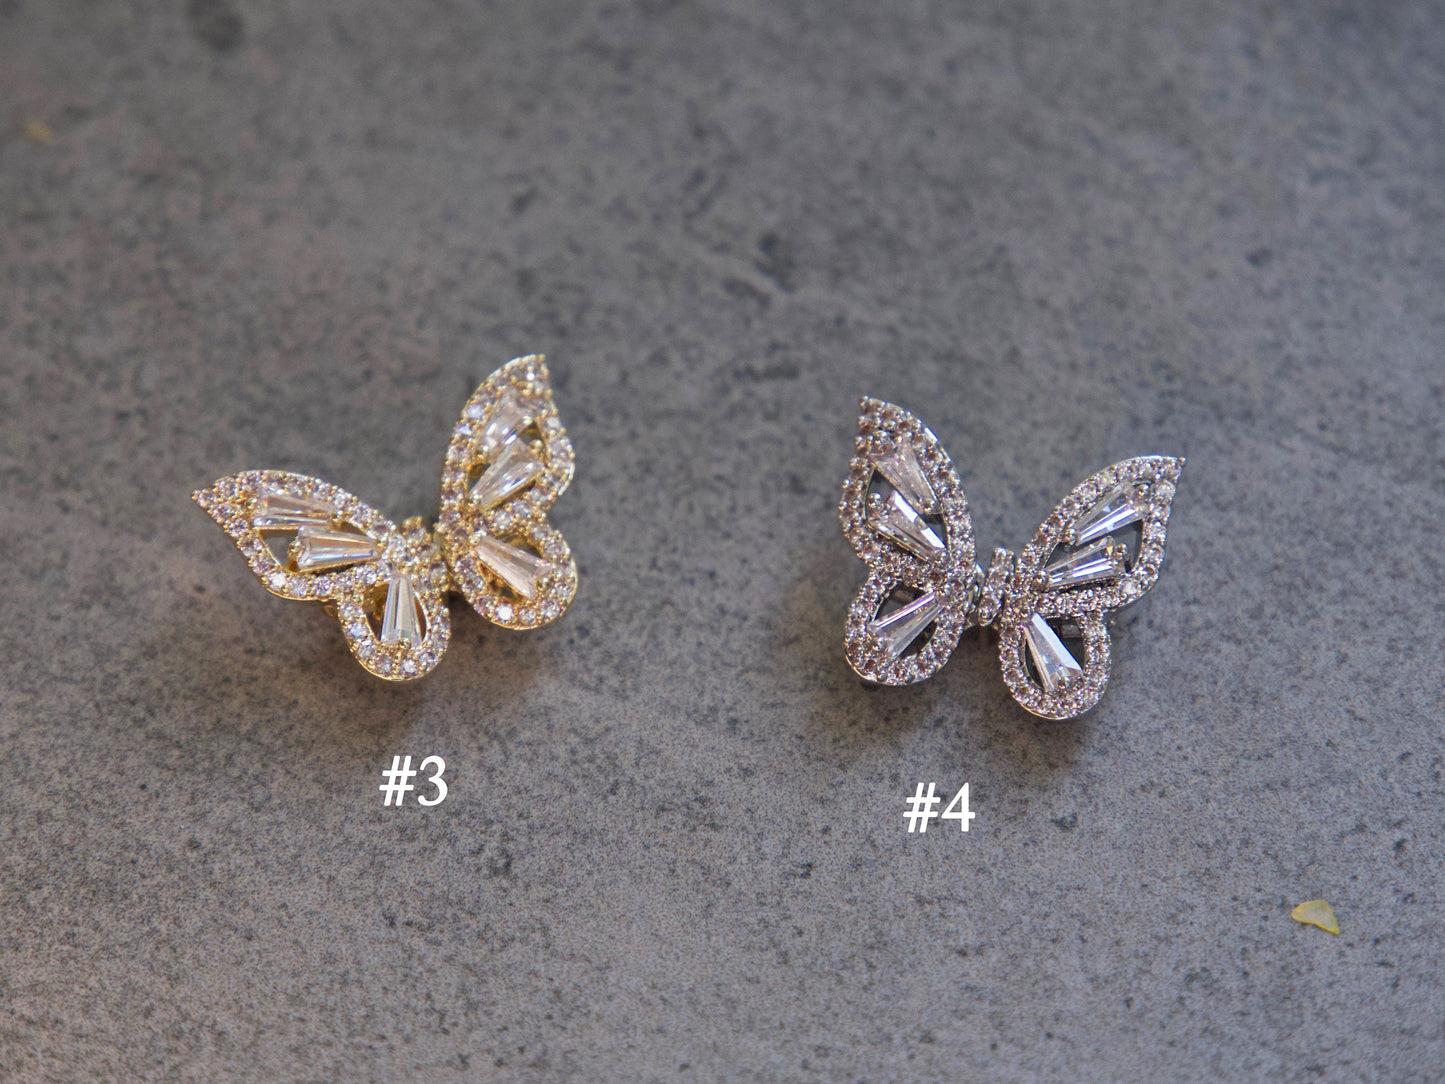 Ethereal Butterfly 3D Zircon Crystal Nail Ornament Decal 14k Gold Waving Wings Instagram Influencer Nail Jewelry Fairy Tale Nail Art